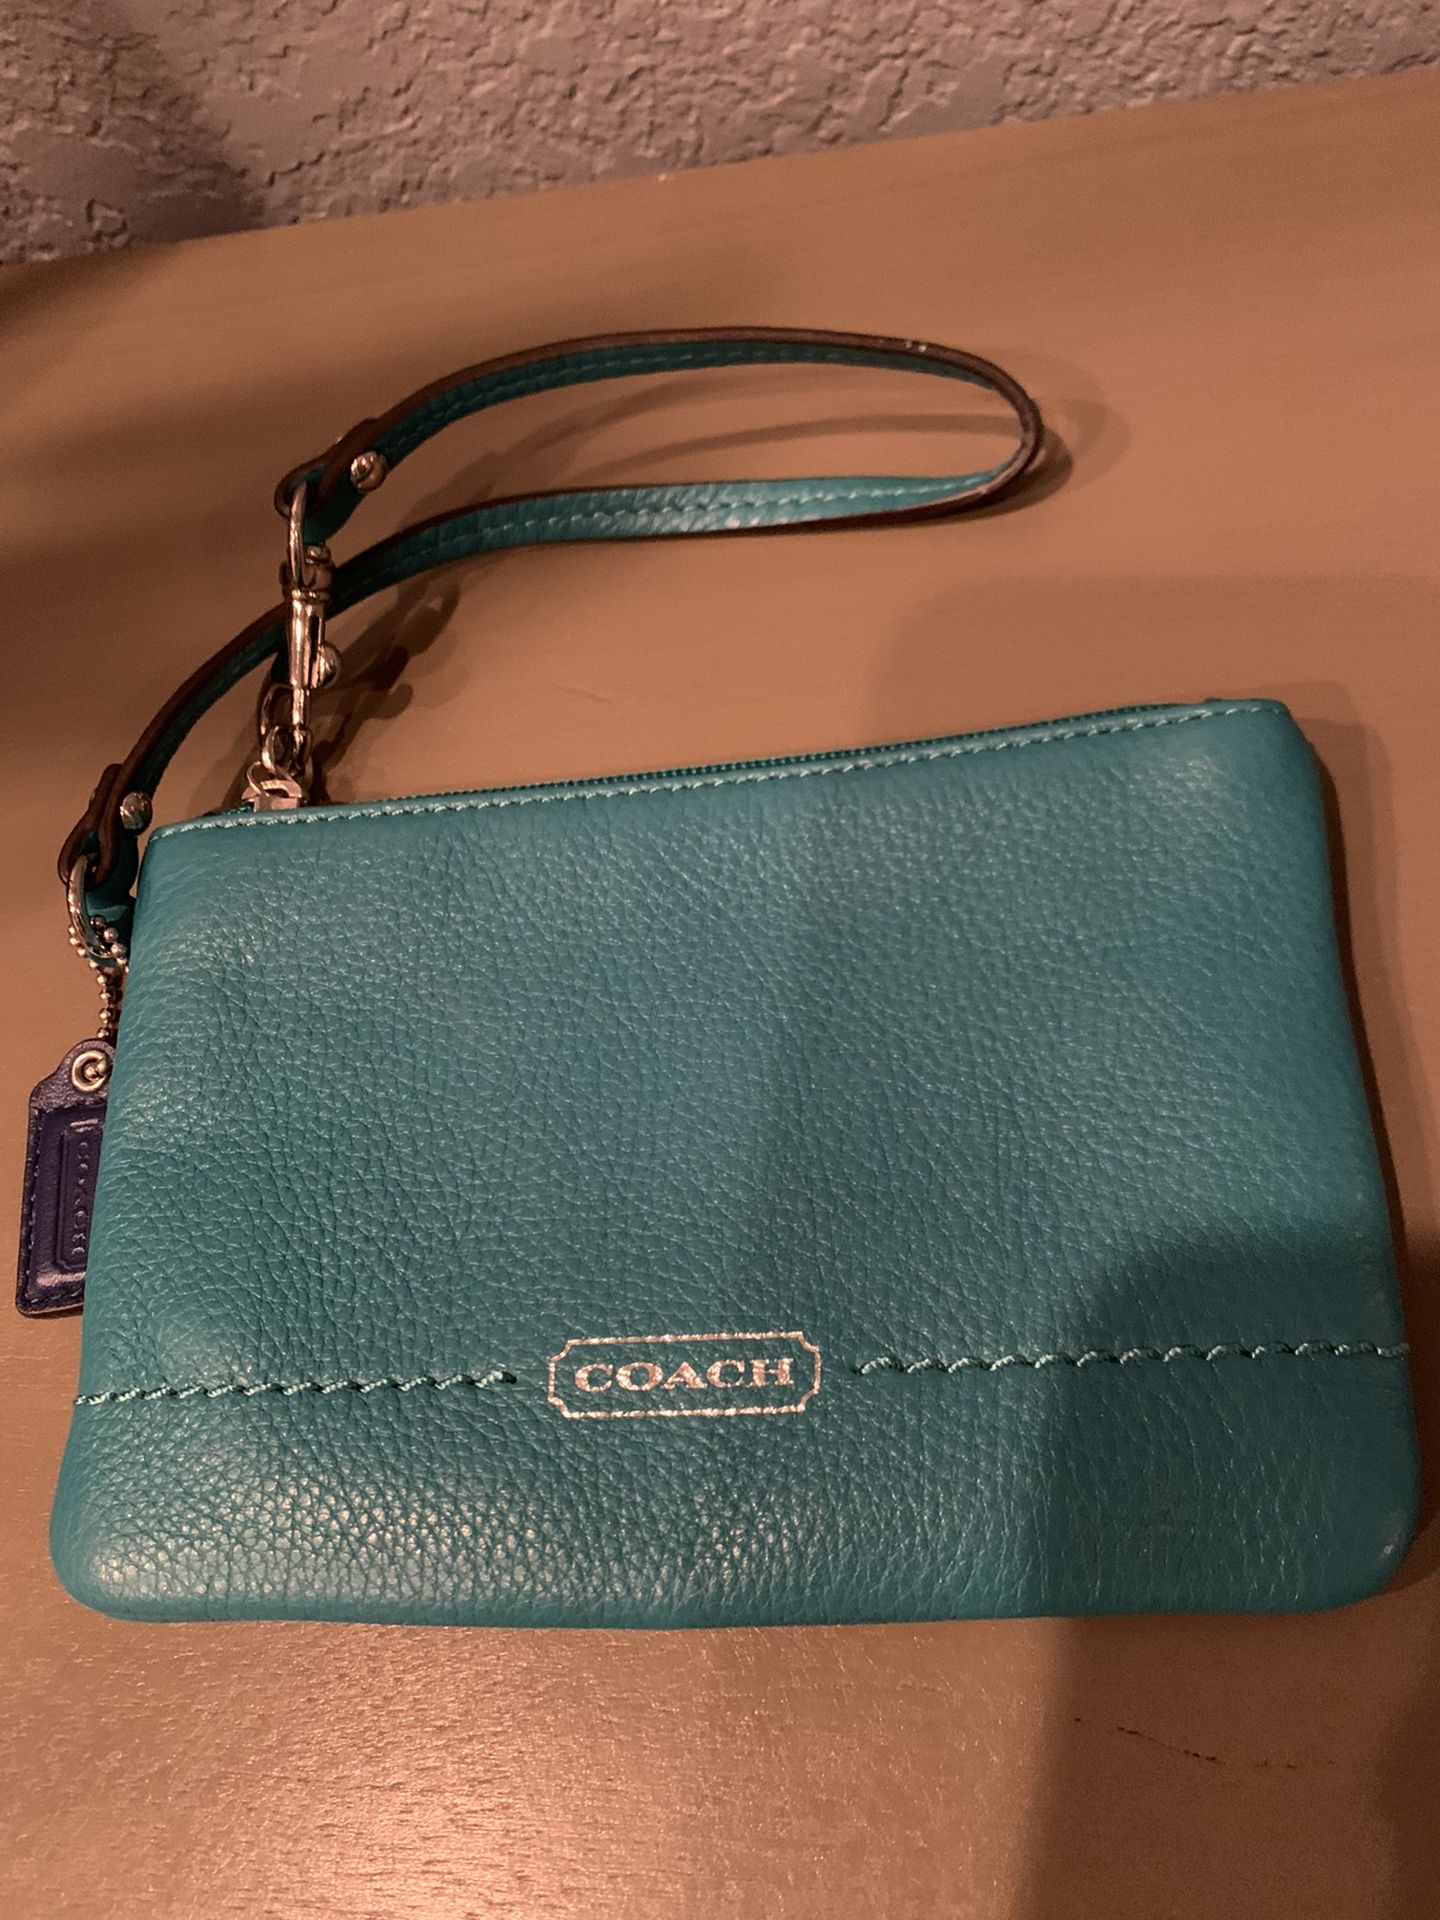 Coach Leather Teal Wristlet 